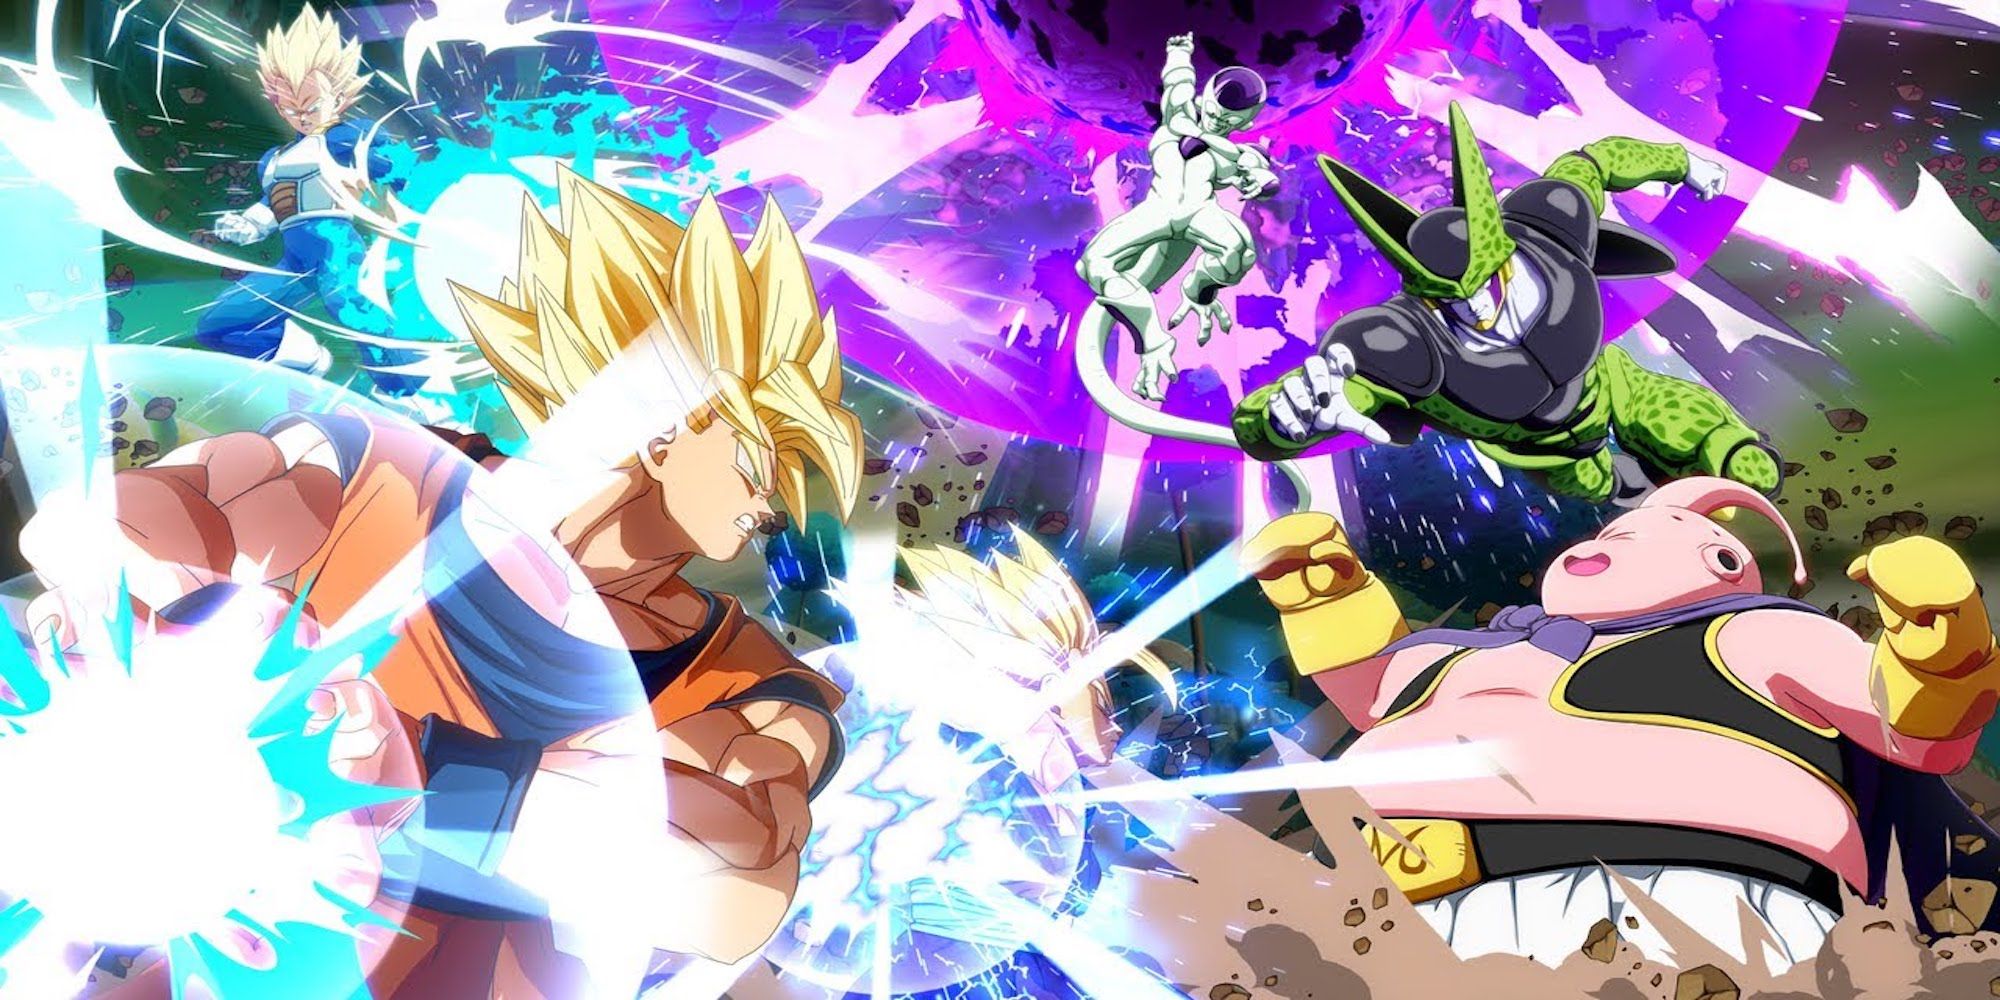 Combat gameplay from Dragon Ball FighterZ